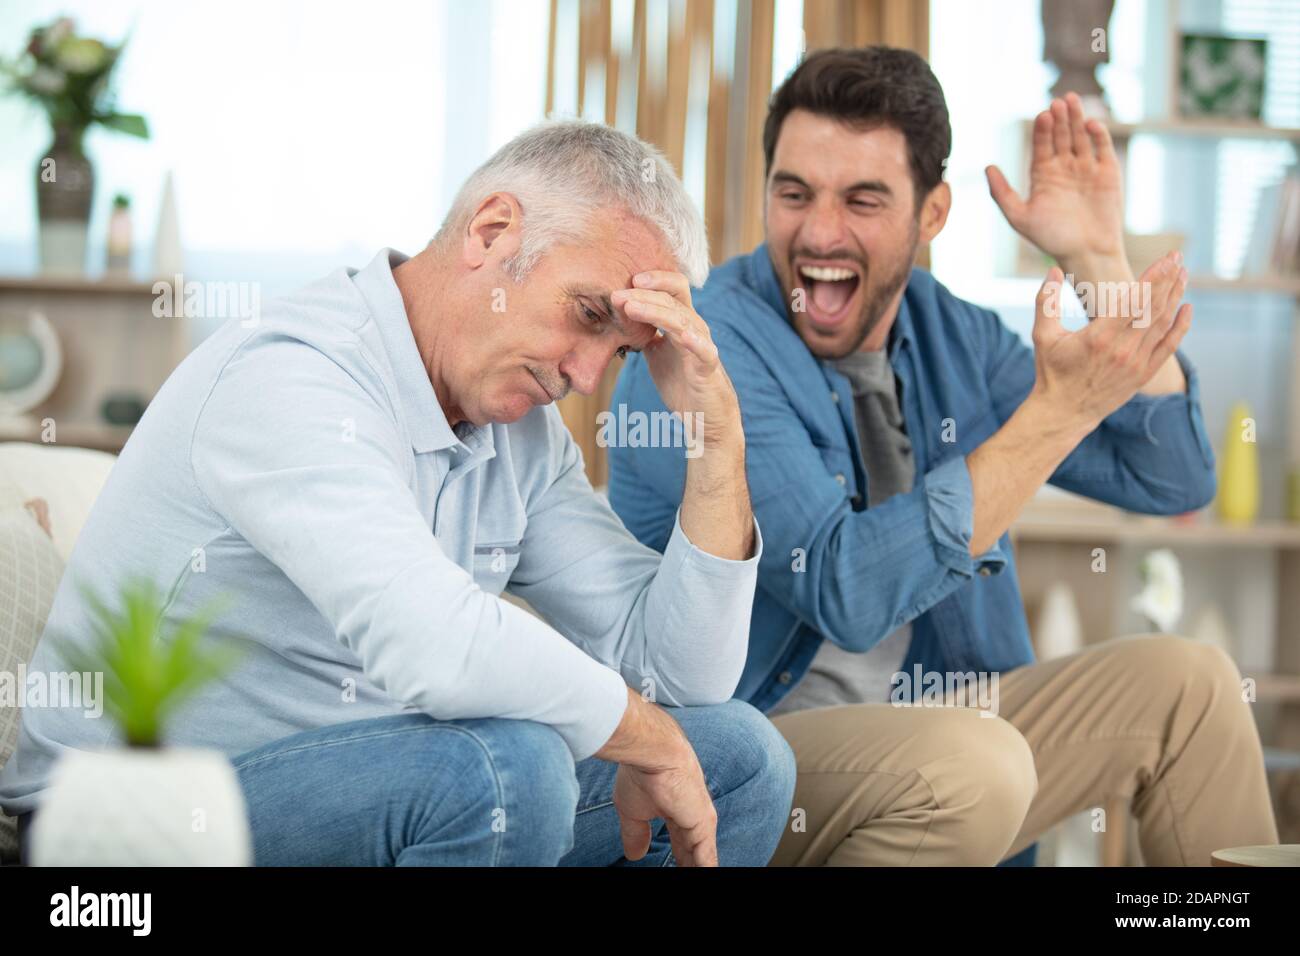 domestic quarrel between mature father and adult son Stock Photo